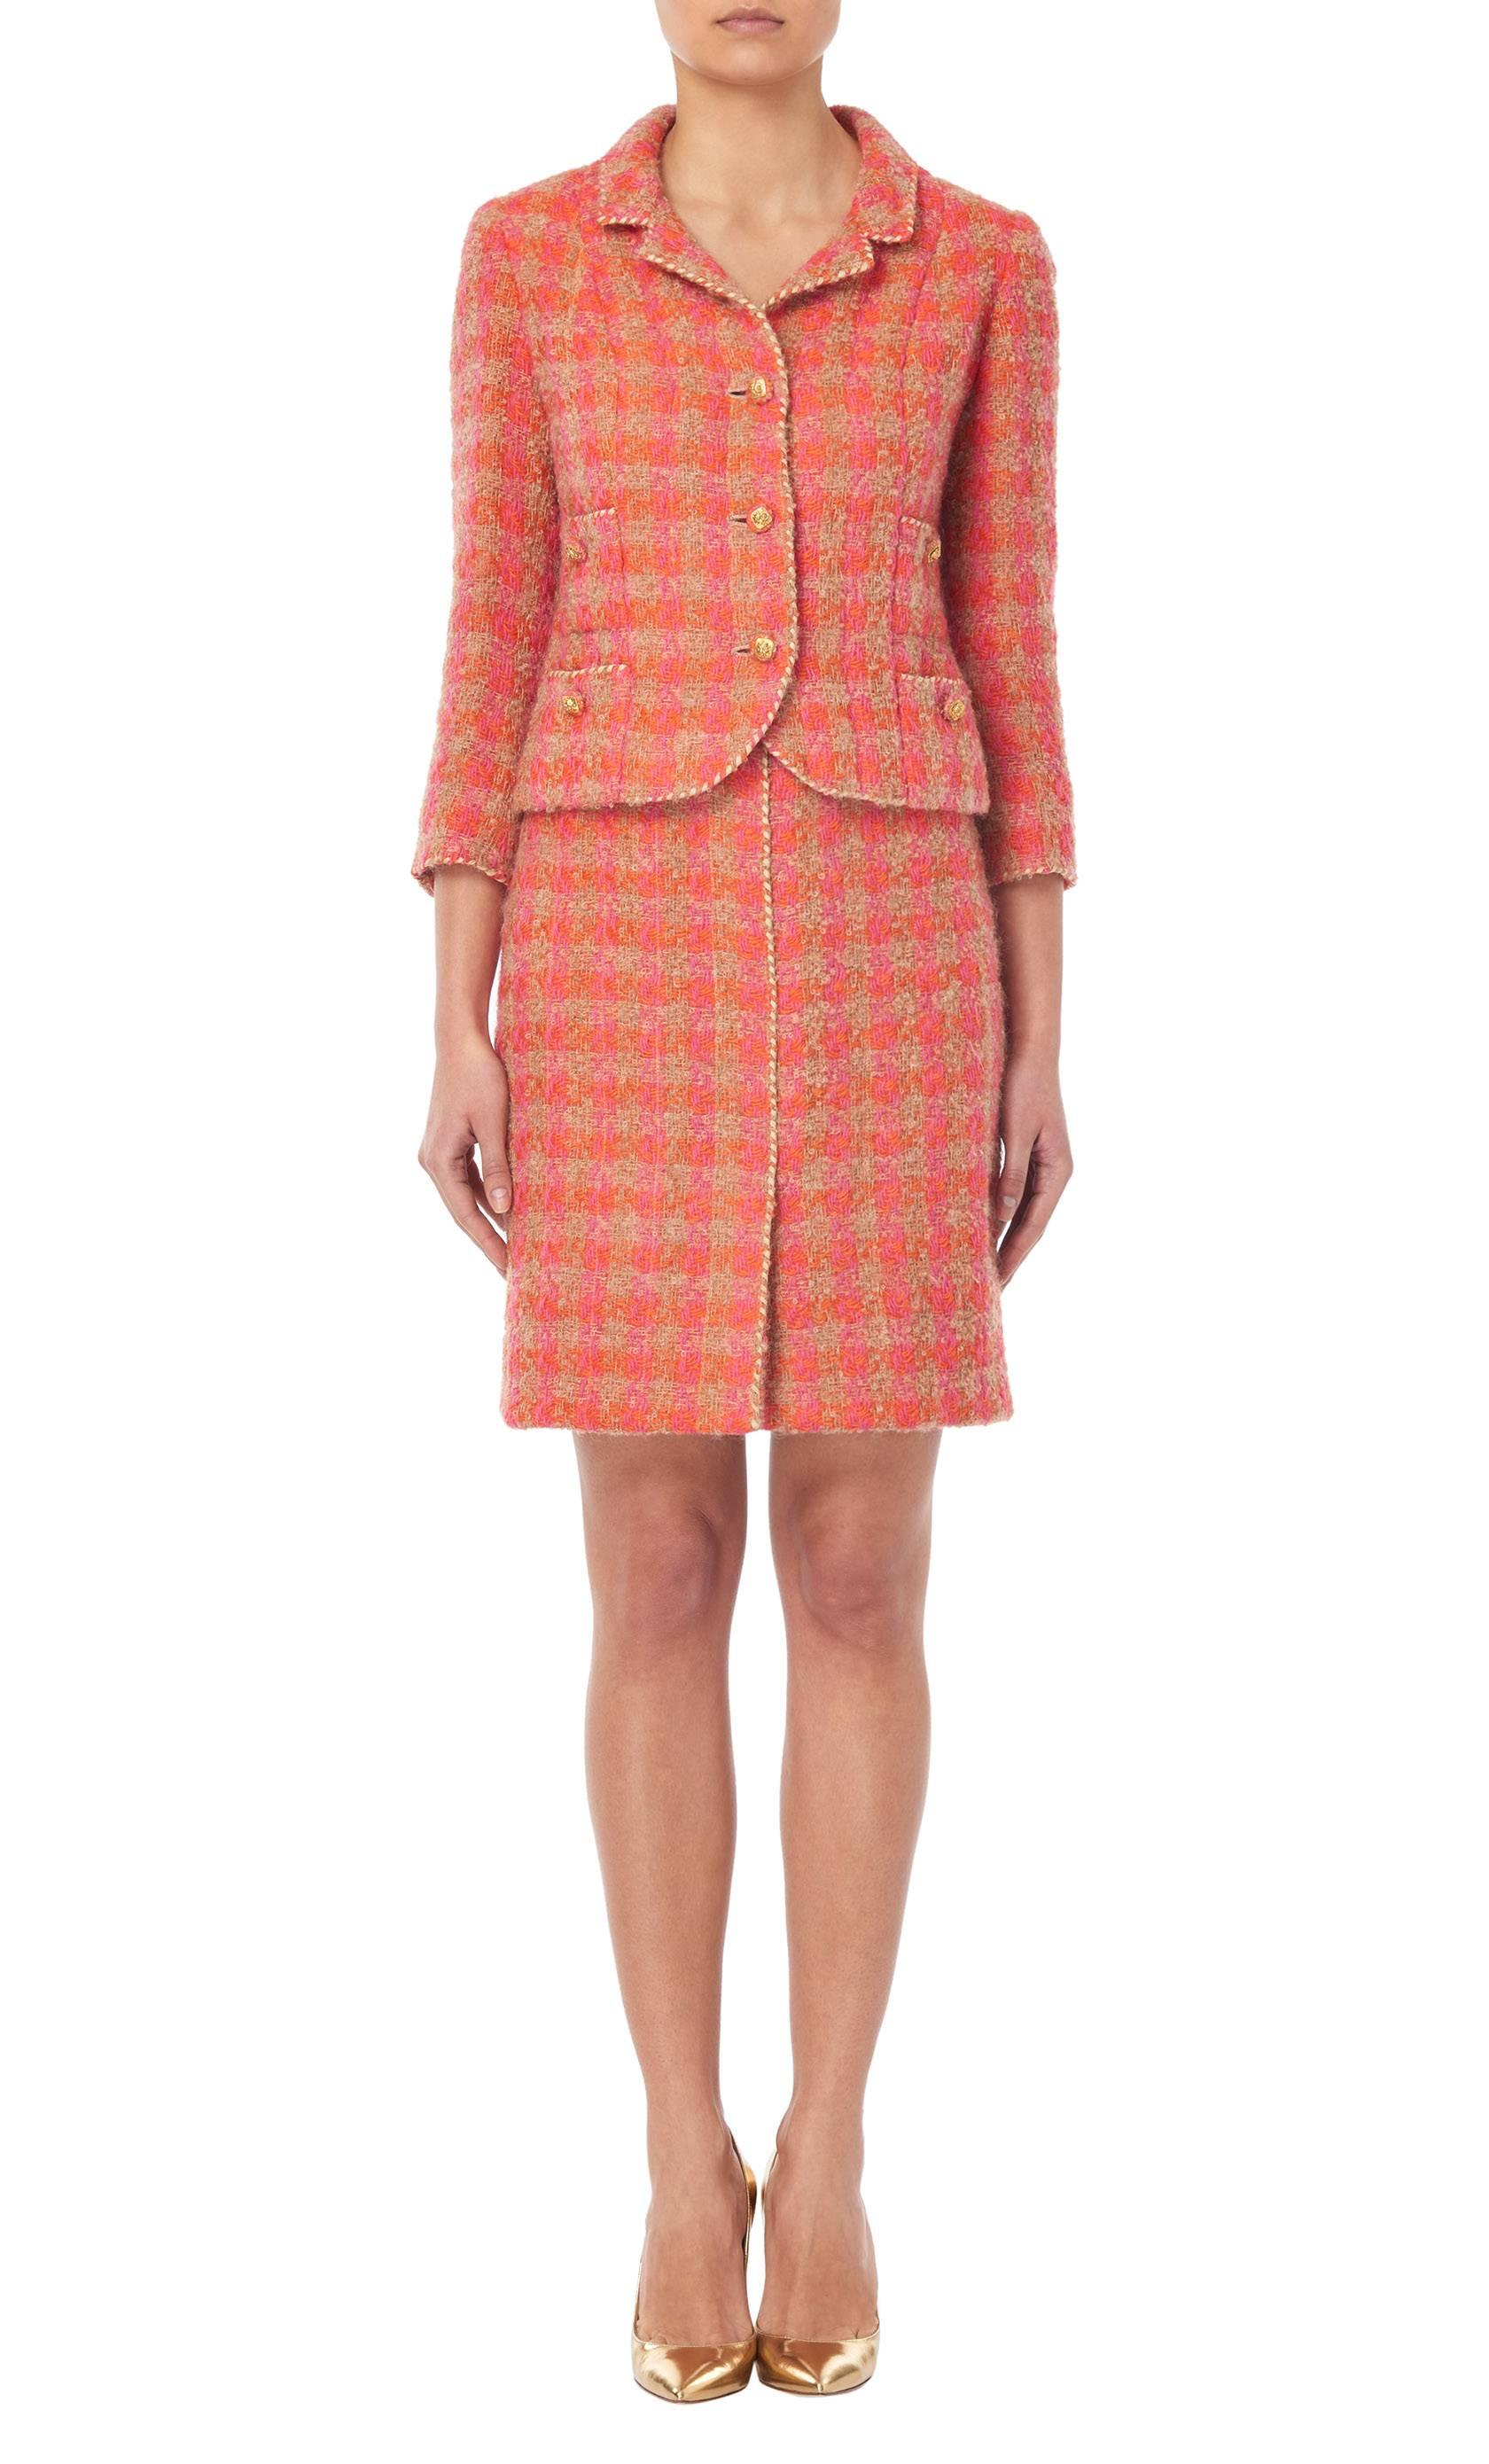 Constructed in bright pink, orange and beige checked bouclé wool this Marie Jansen suit comprises of a jacket and knee-length skirt. Featuring a double lapel collar, three-quarter length sleeves and pockets on the bust and hips, fabric-matched